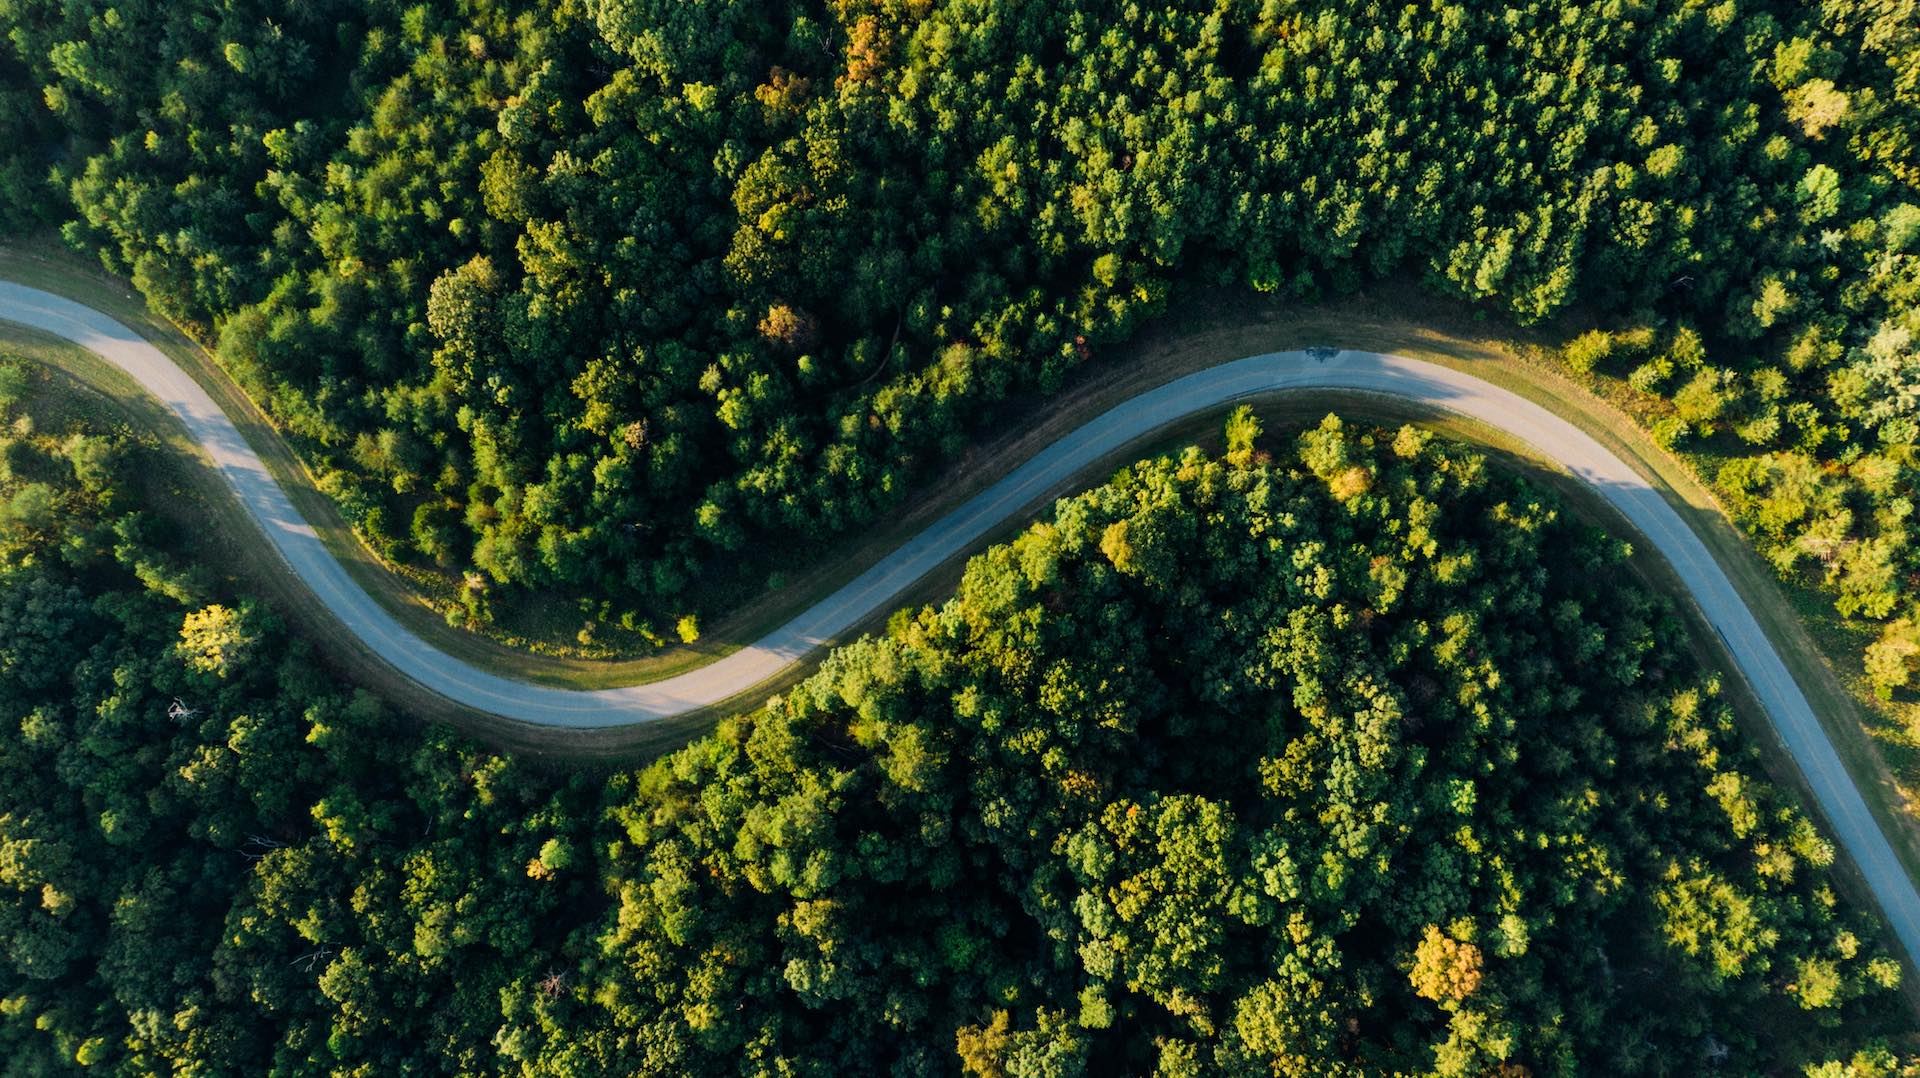 curved road surrounded by trees